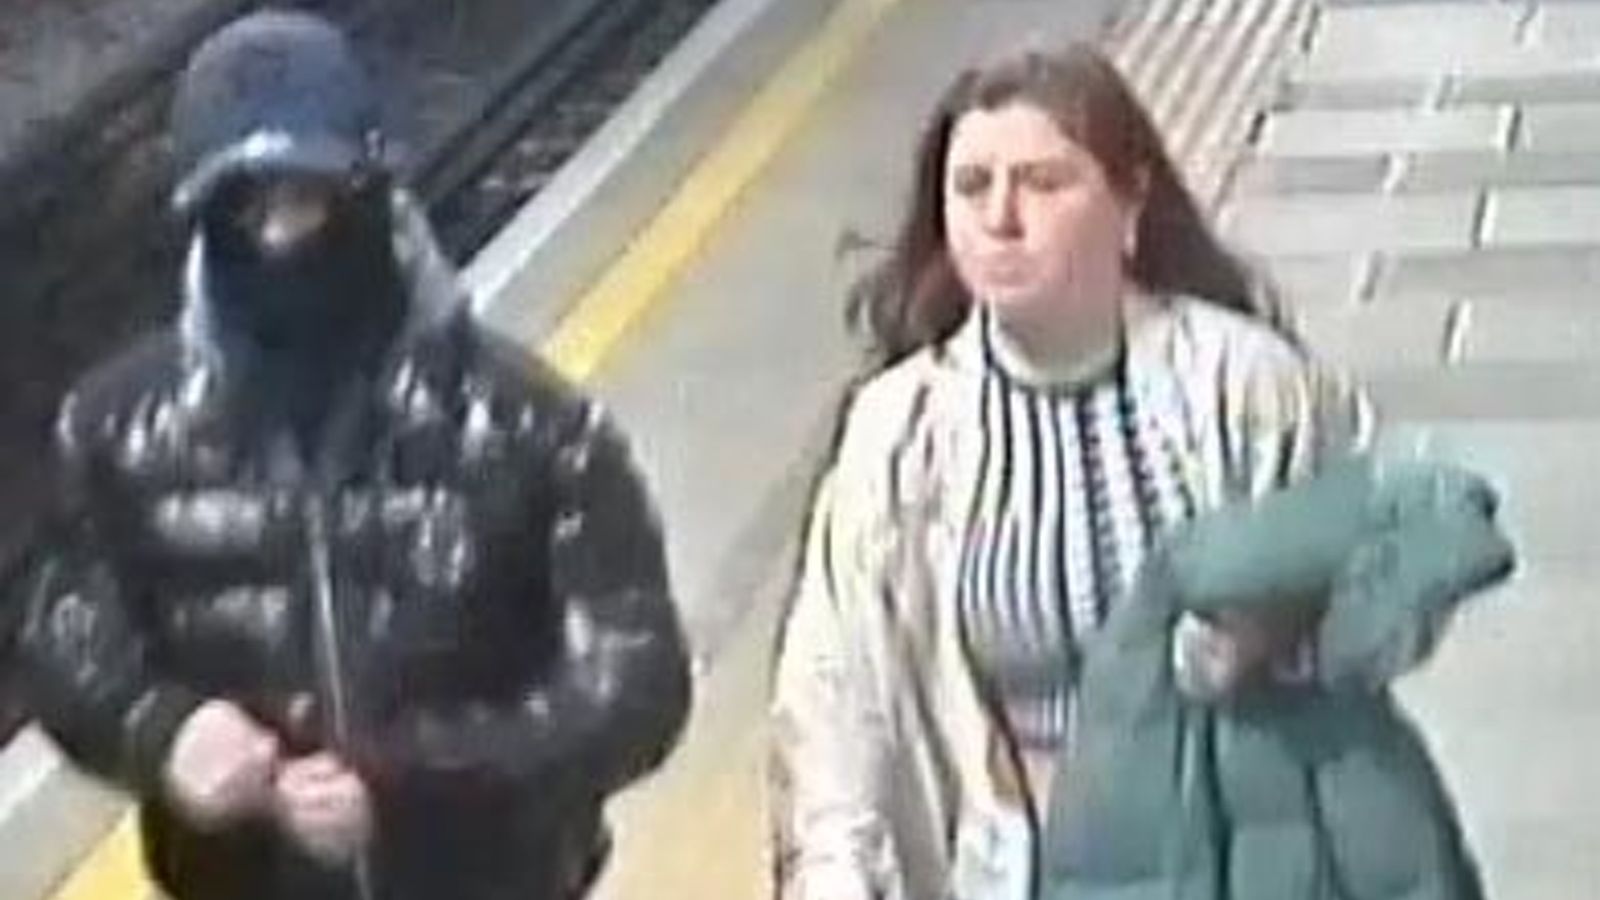 East London: Images released after ‘corrosive liquid’ thrown at two boys at Tube station | UK News